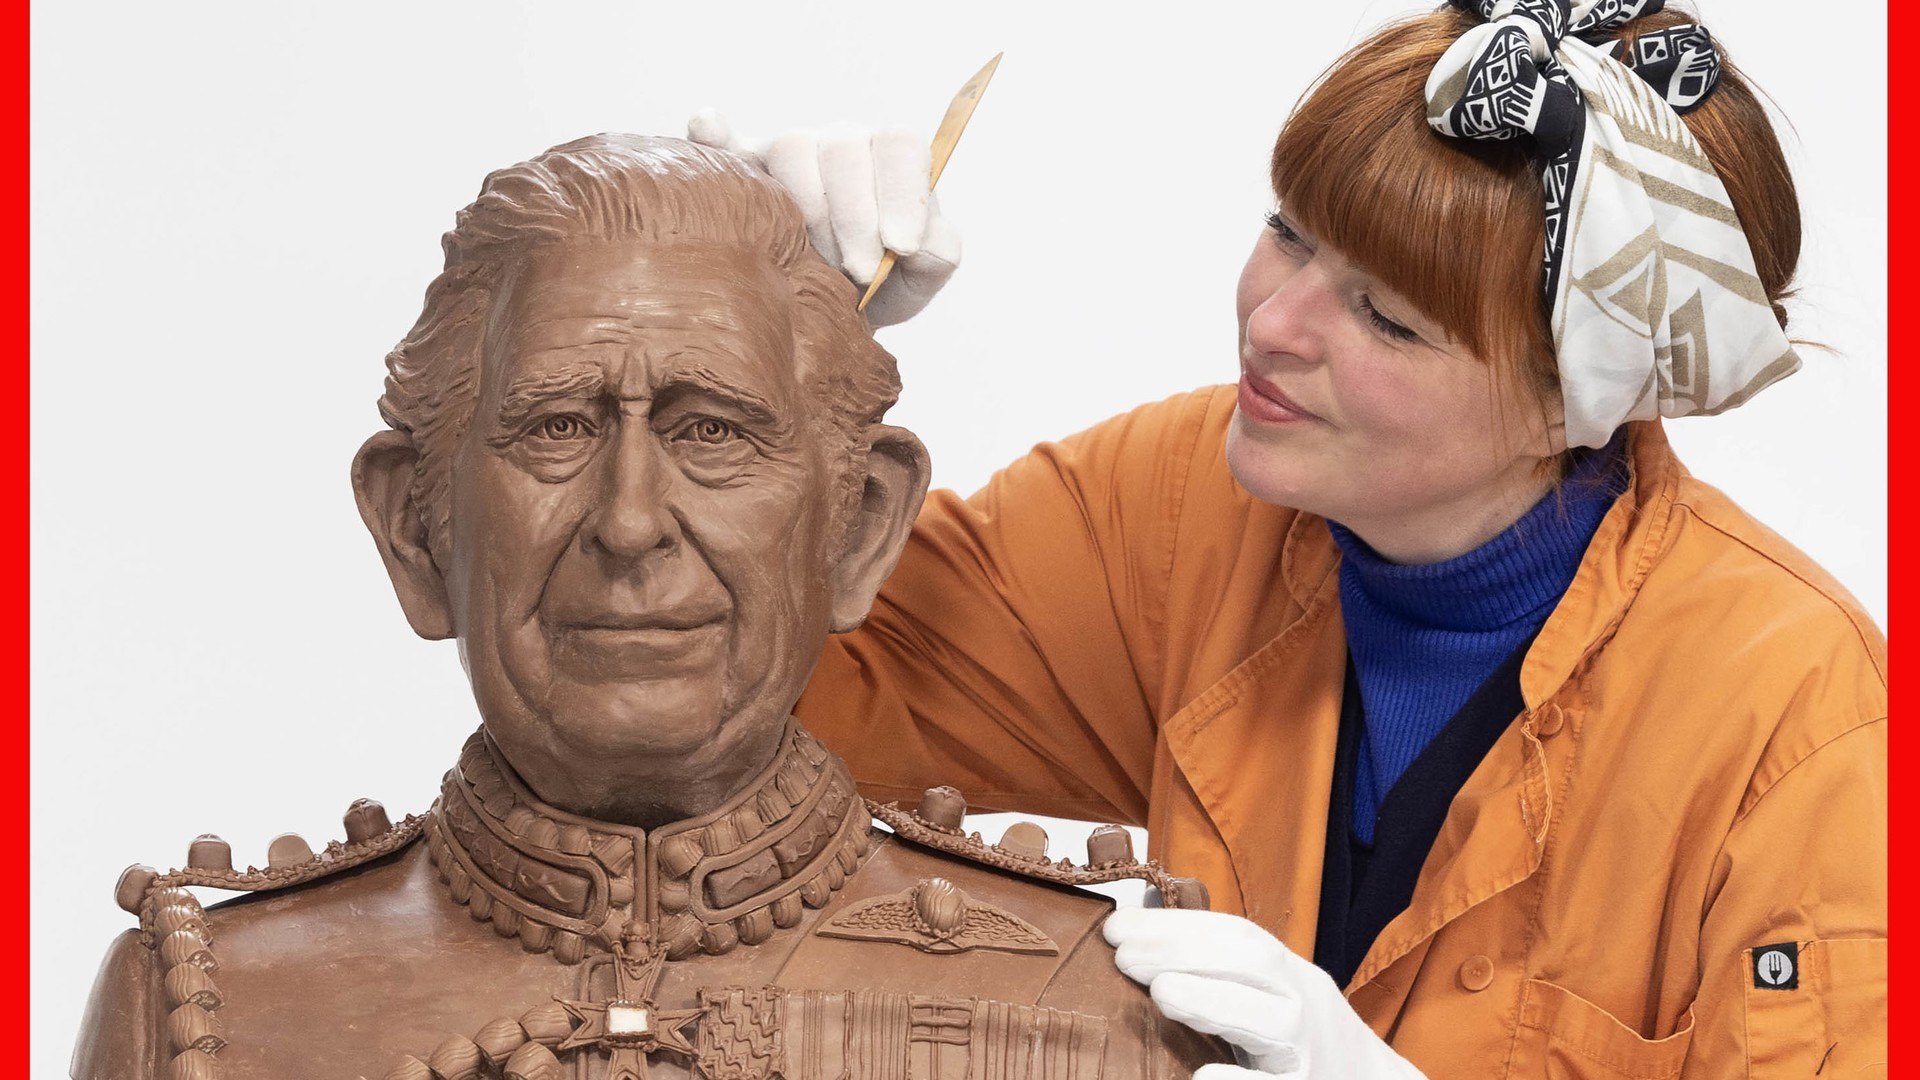 The bust took four weeks to create and weighs over 23kg